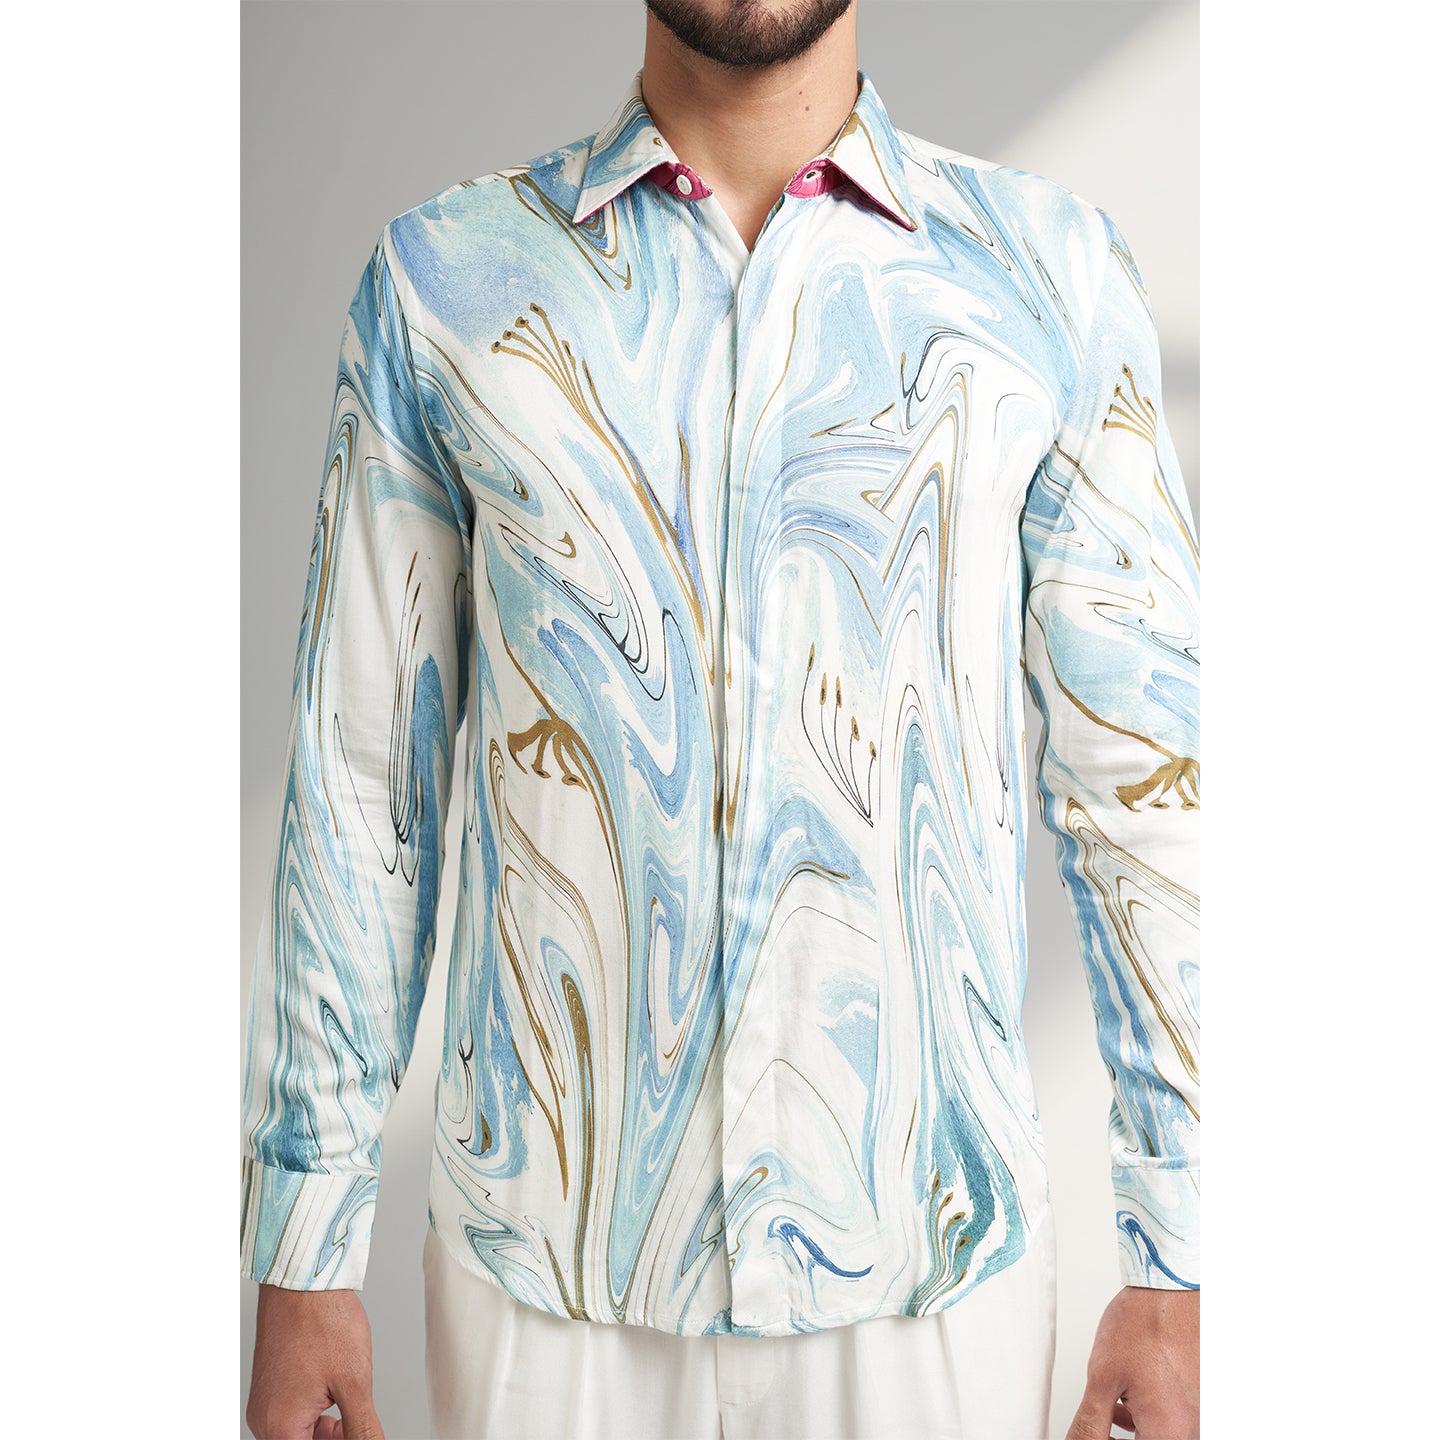 An Organic lotus stem silk fabric printed shirt in blue white and brown color, printed with non toxic GOTS certified inks. the shirt is printed by an inspiration from antiques.